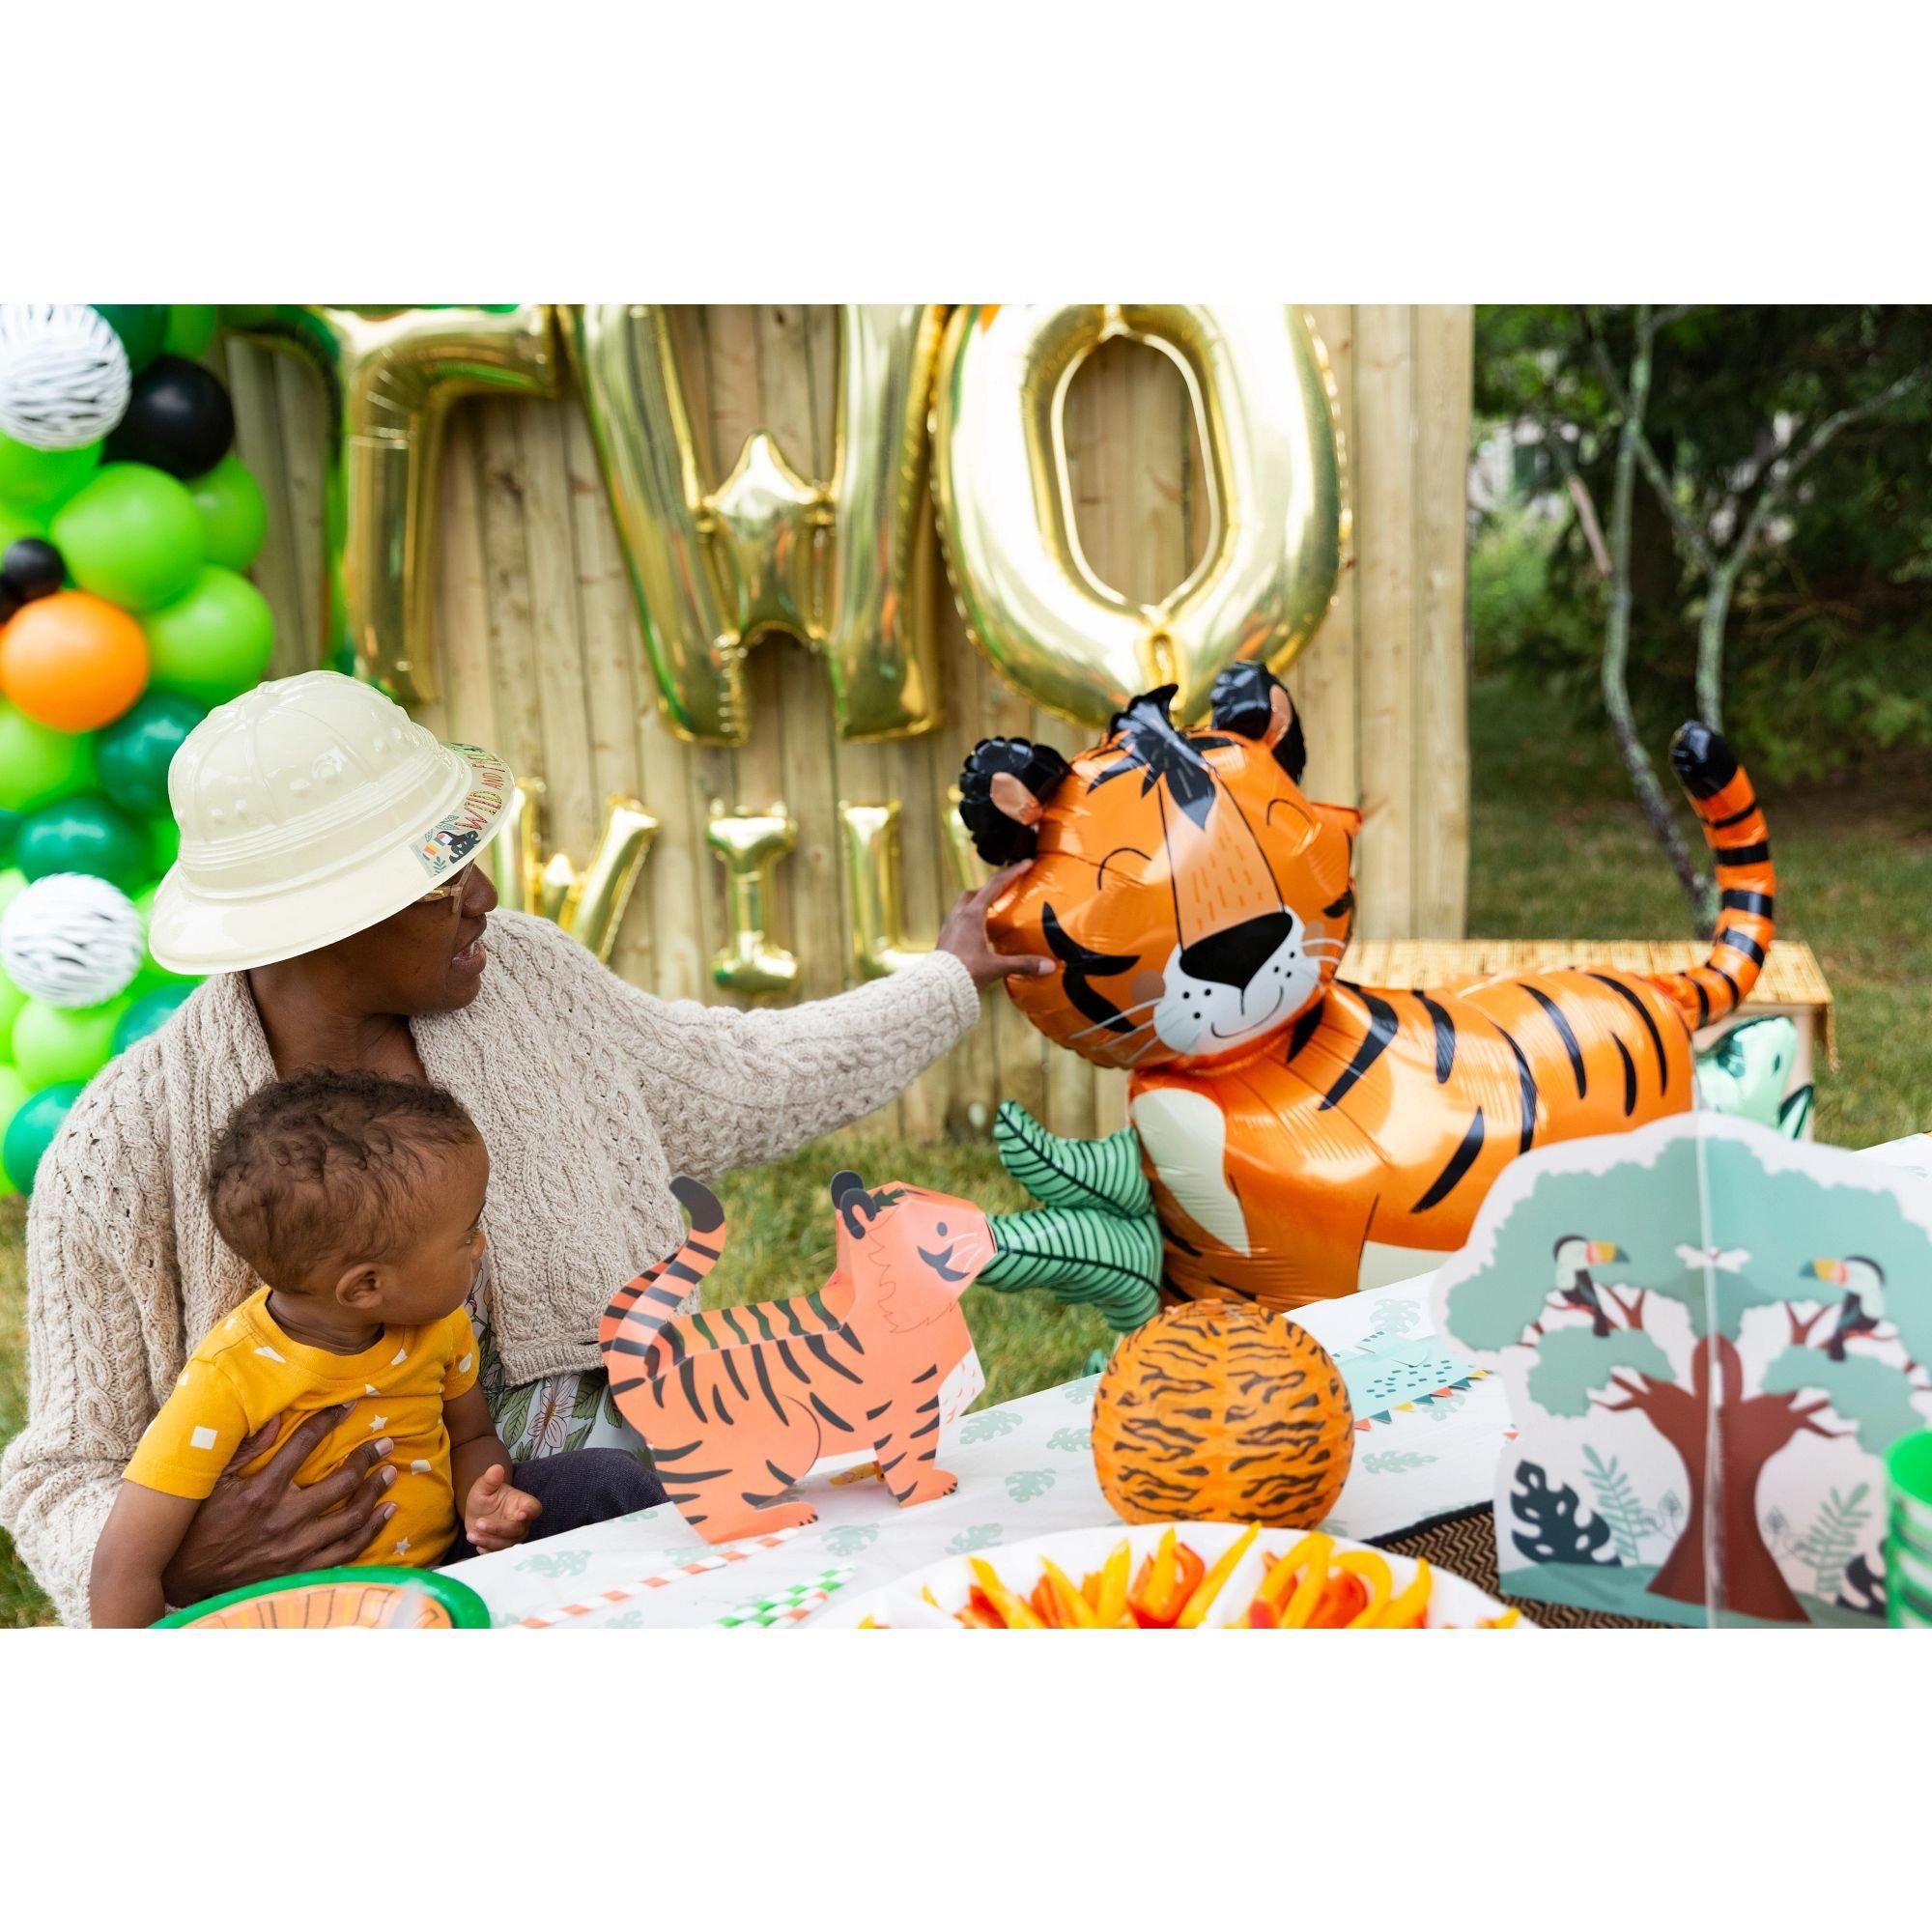 Get Wild Jungle Cardstock Table Decorating Kit, 5pc